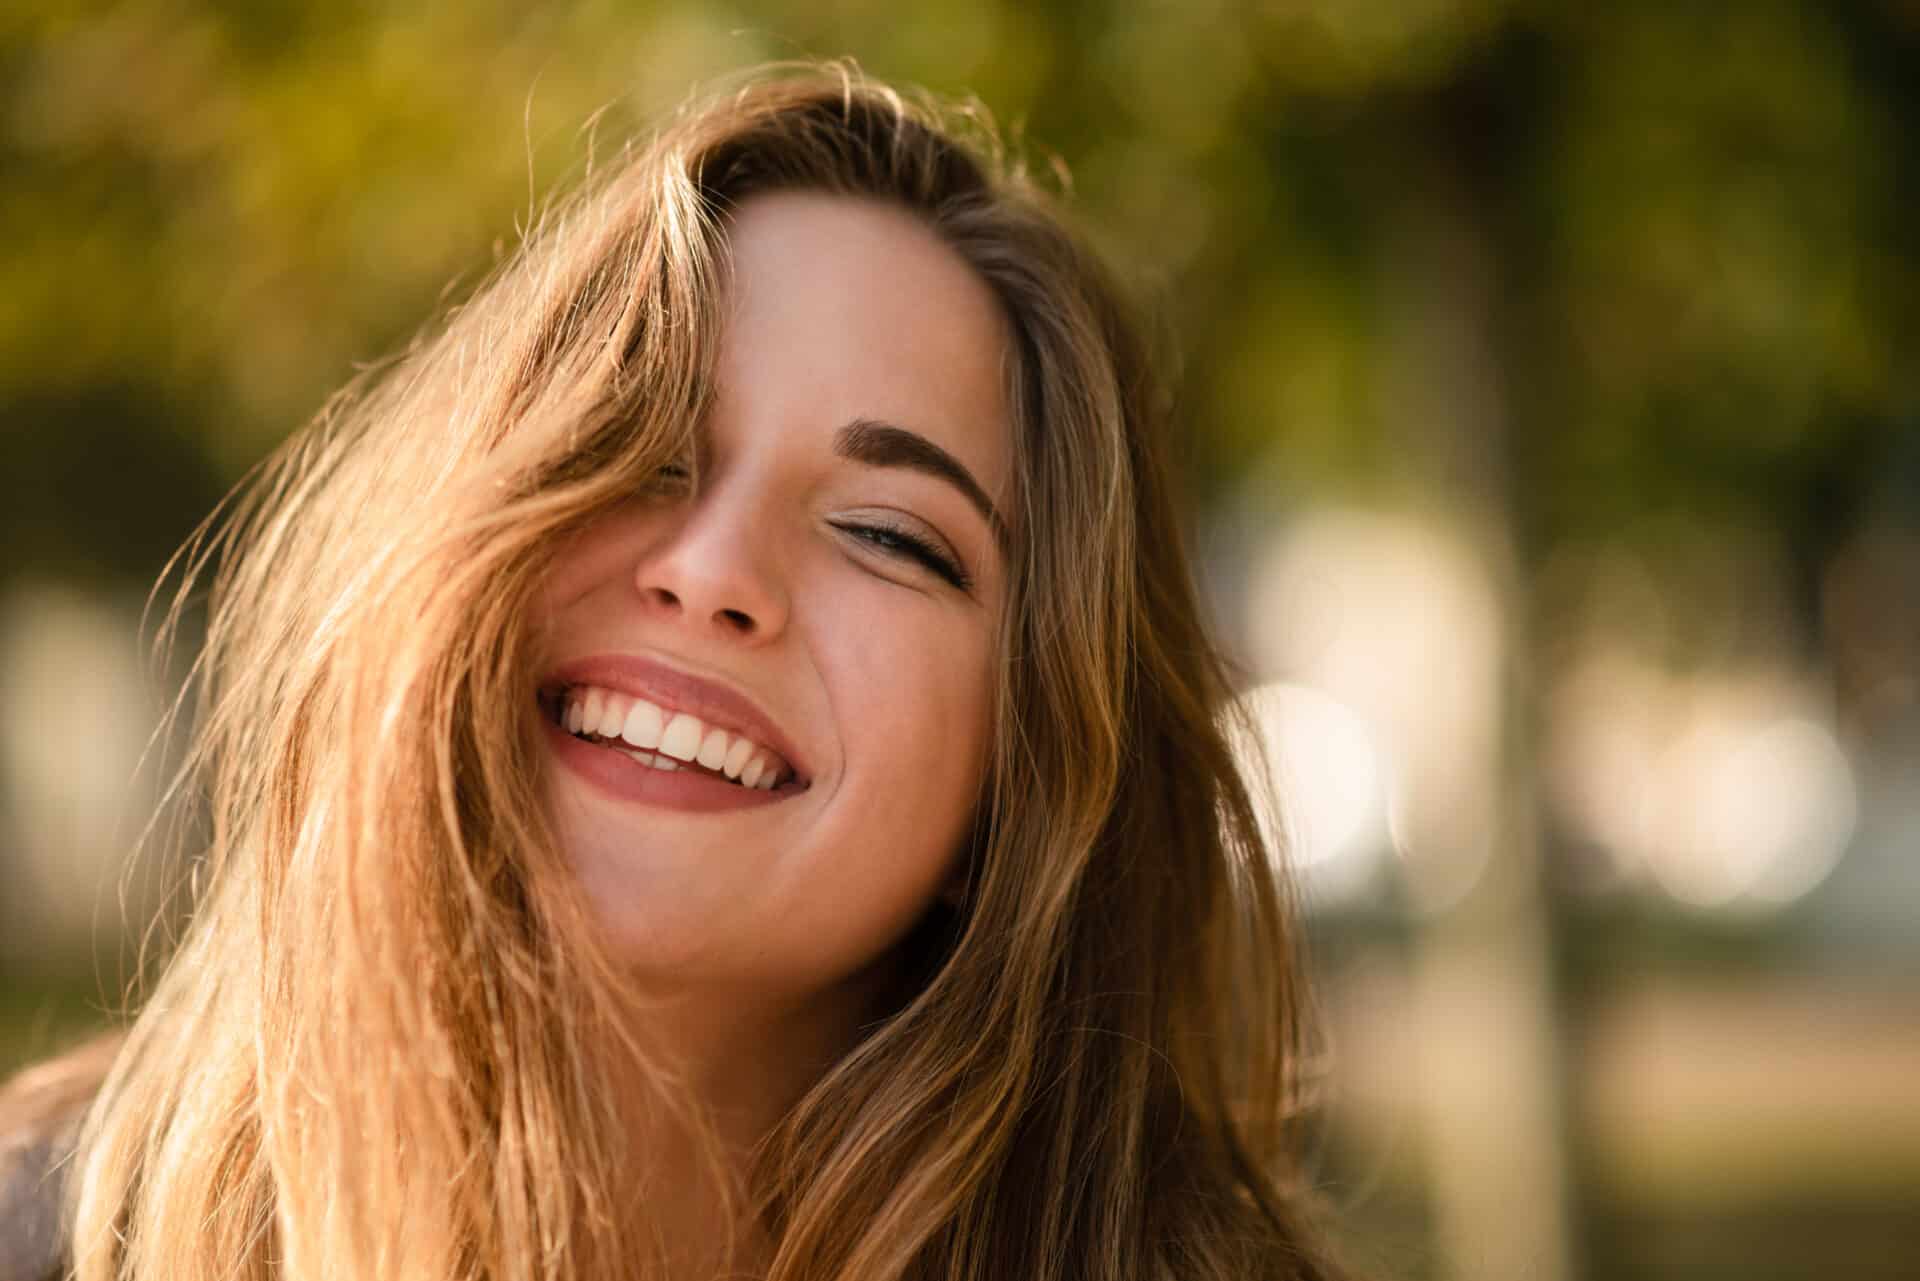 Smiling woman with perfect white teeth